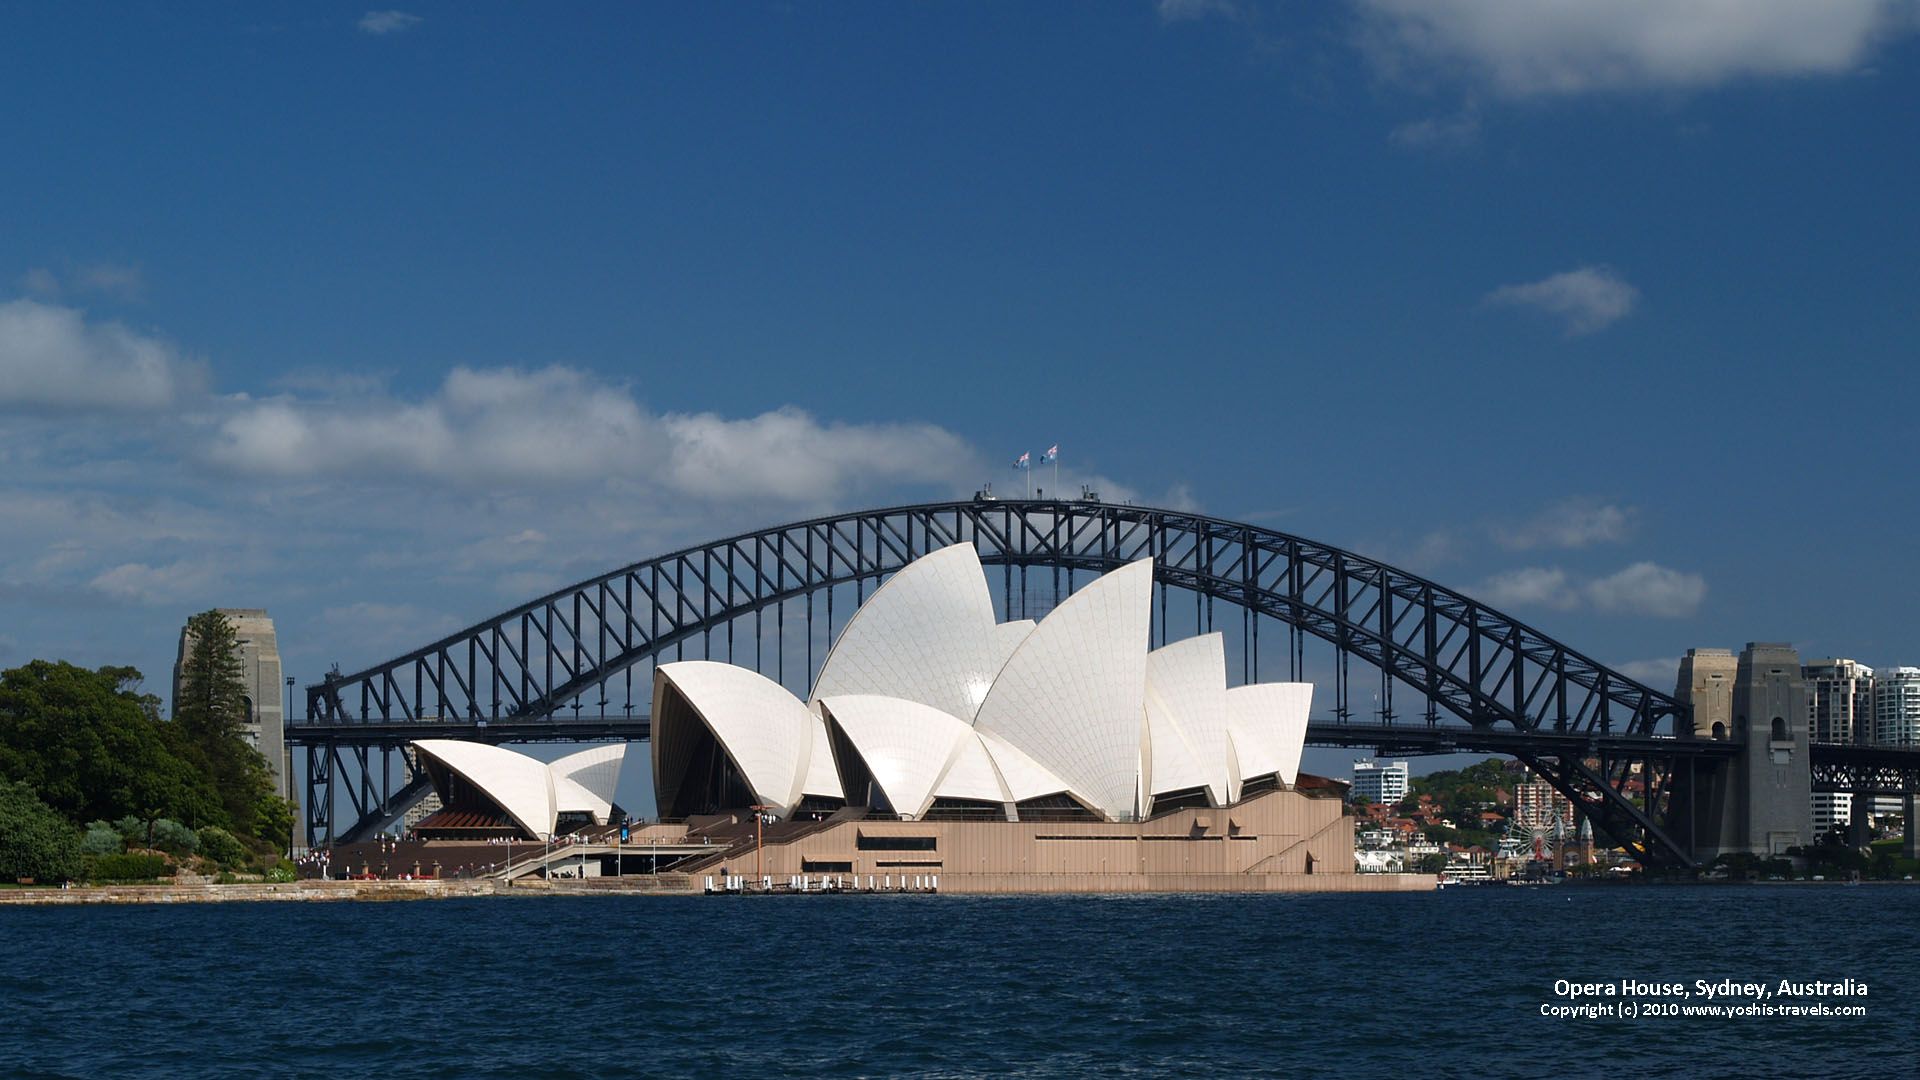 1920x1080 Free Download Sydney Opera House Wallpaper 415879 1920x1080 For Your Desktop Mobile Tablet Explore Opera House Wallpaper Phantom Of The Opera Wallpaper Opera Browser Wallpaper Arthouse Wallpaper Uk